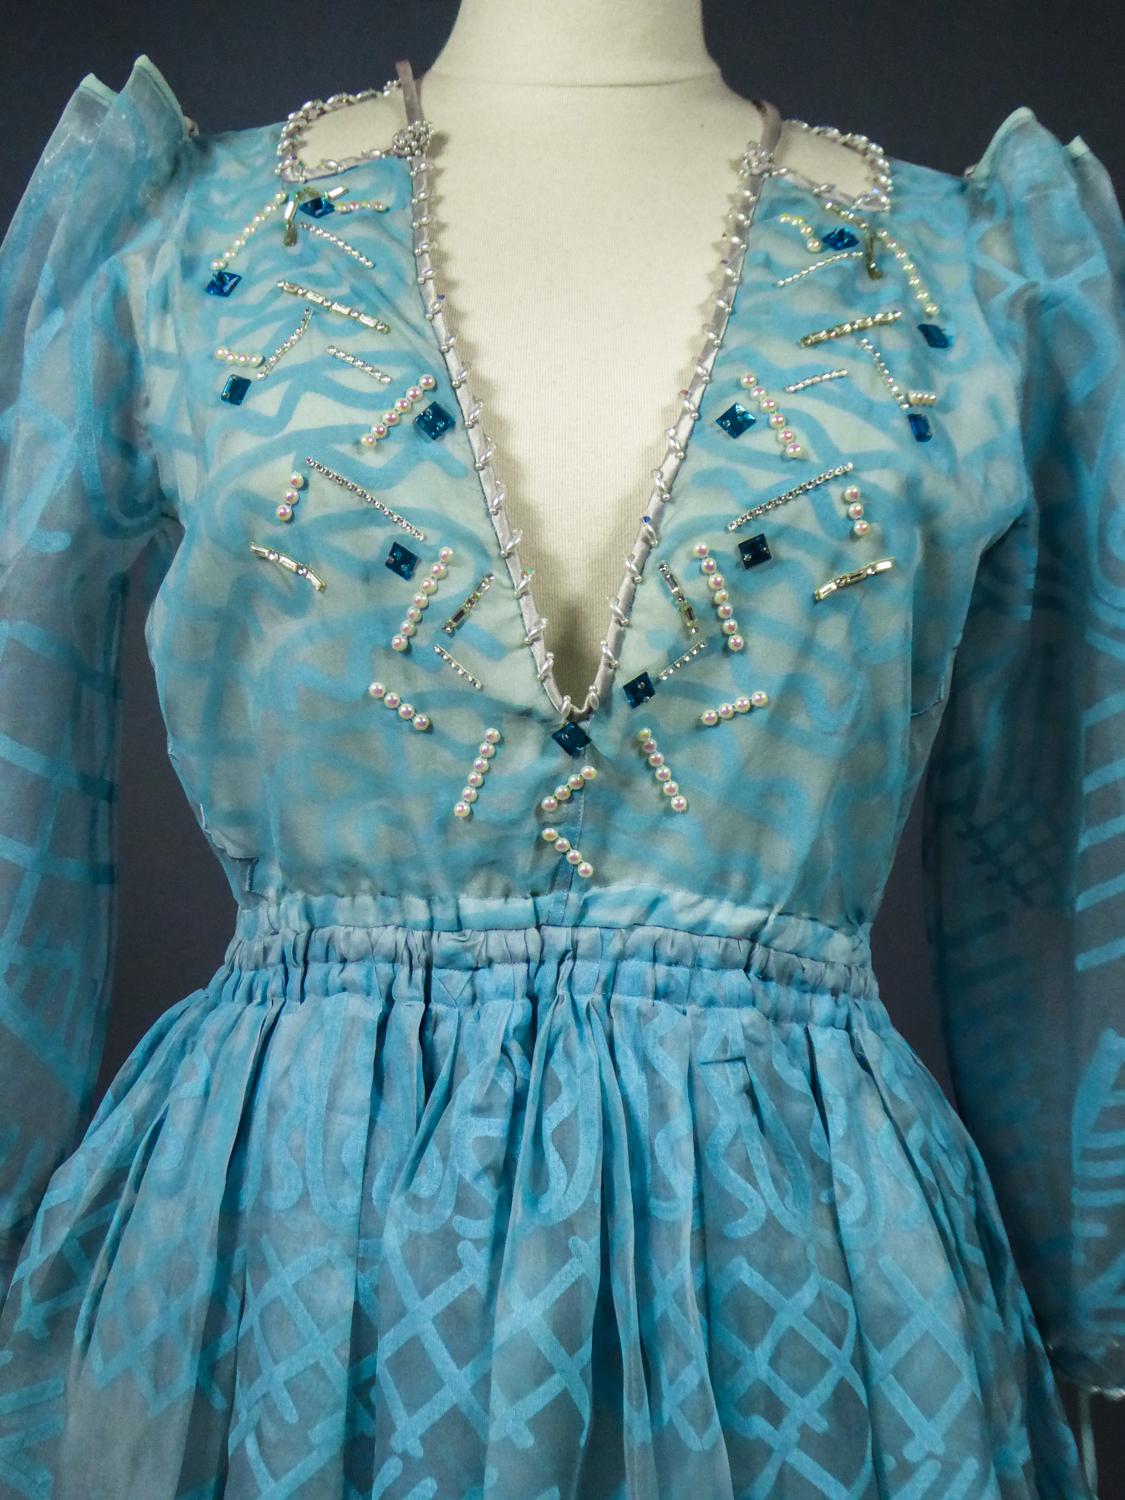 A Zandra Rhodes Evening Dress in Printed Organza - Fortuny Influence- Circa 1980 For Sale 1